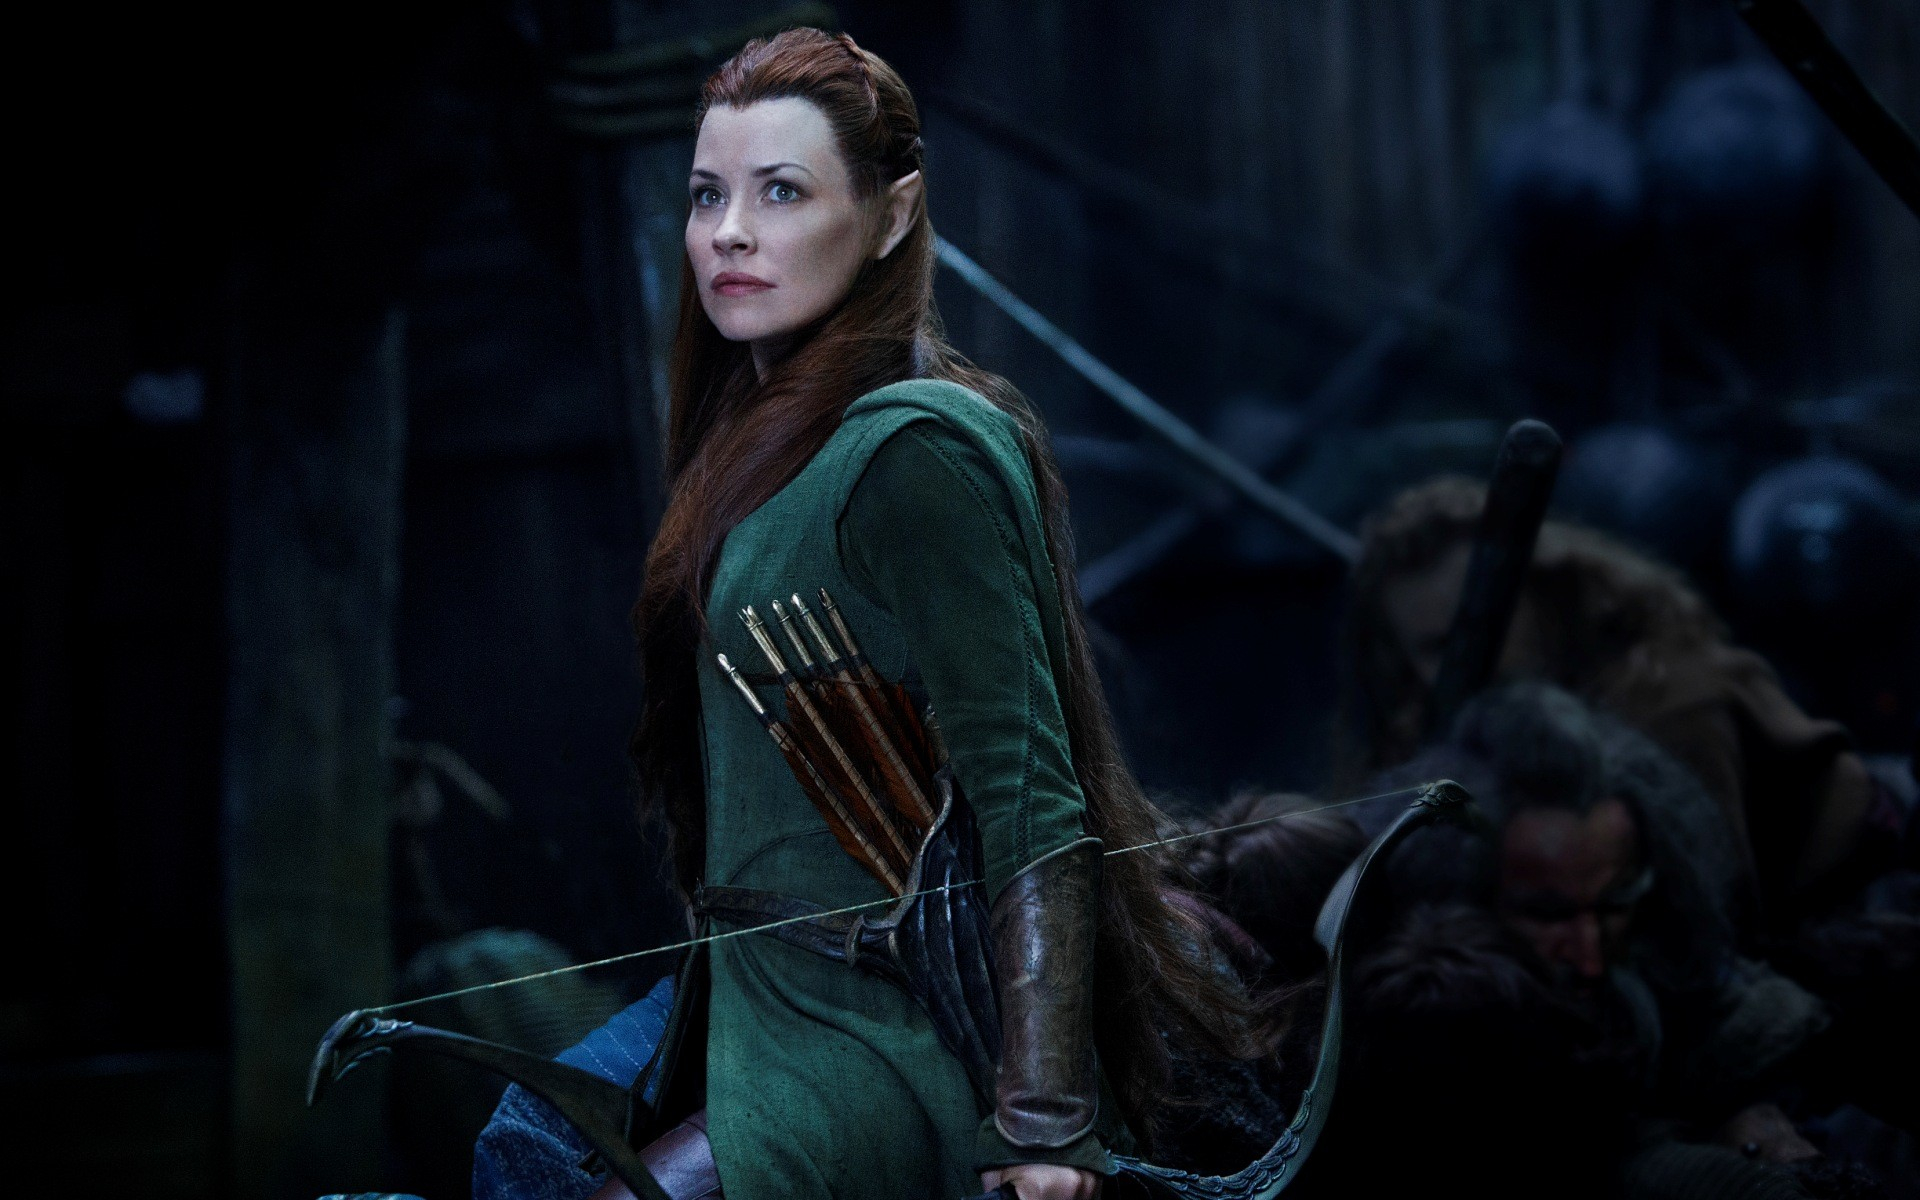 1920x1200 Wallpaper : women, redhead, movies, hair bows, Evangeline Lilly, The Hobbit The Battle of the Five Armies, Tauriel, darkness, screenshot, computer wallpaper, musical theatre, fictional character 165031 HD Wallpapers